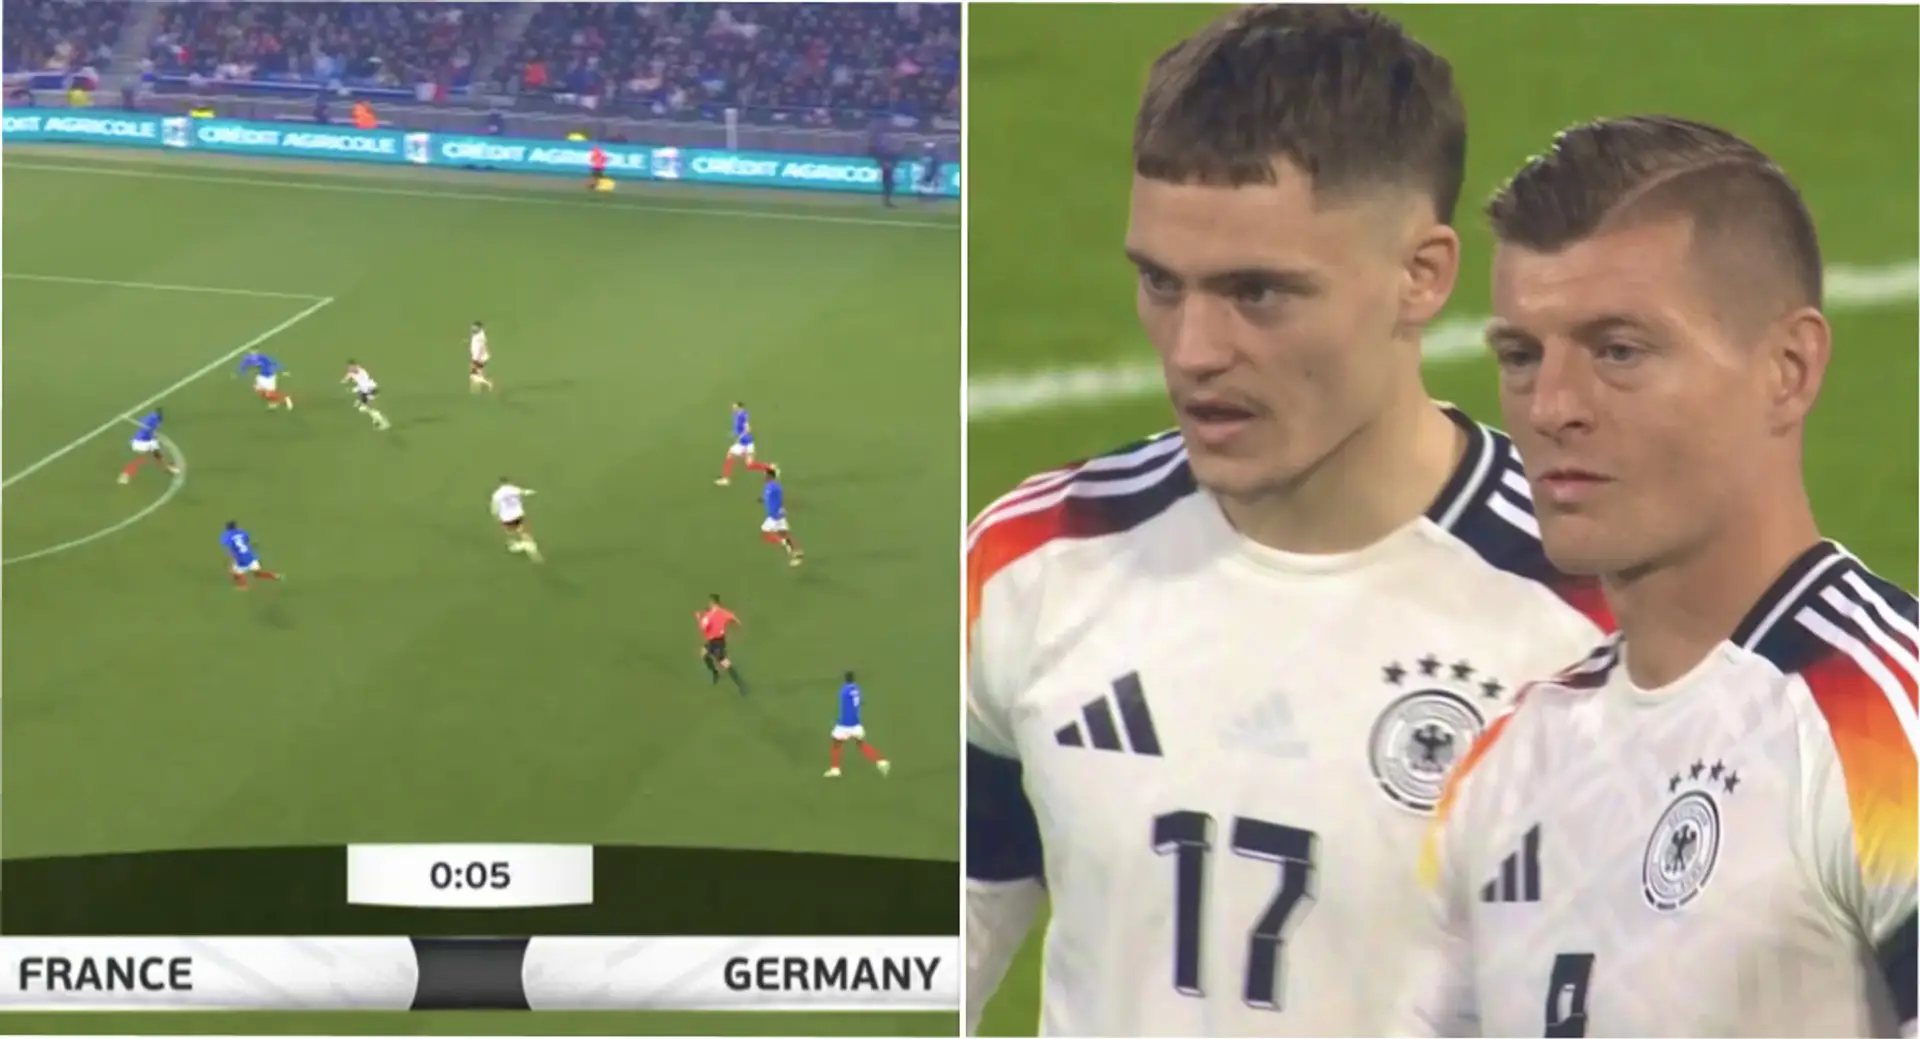 Toni Kroos fires assist for Germany SEVEN SECONDS into his first game back from retirement